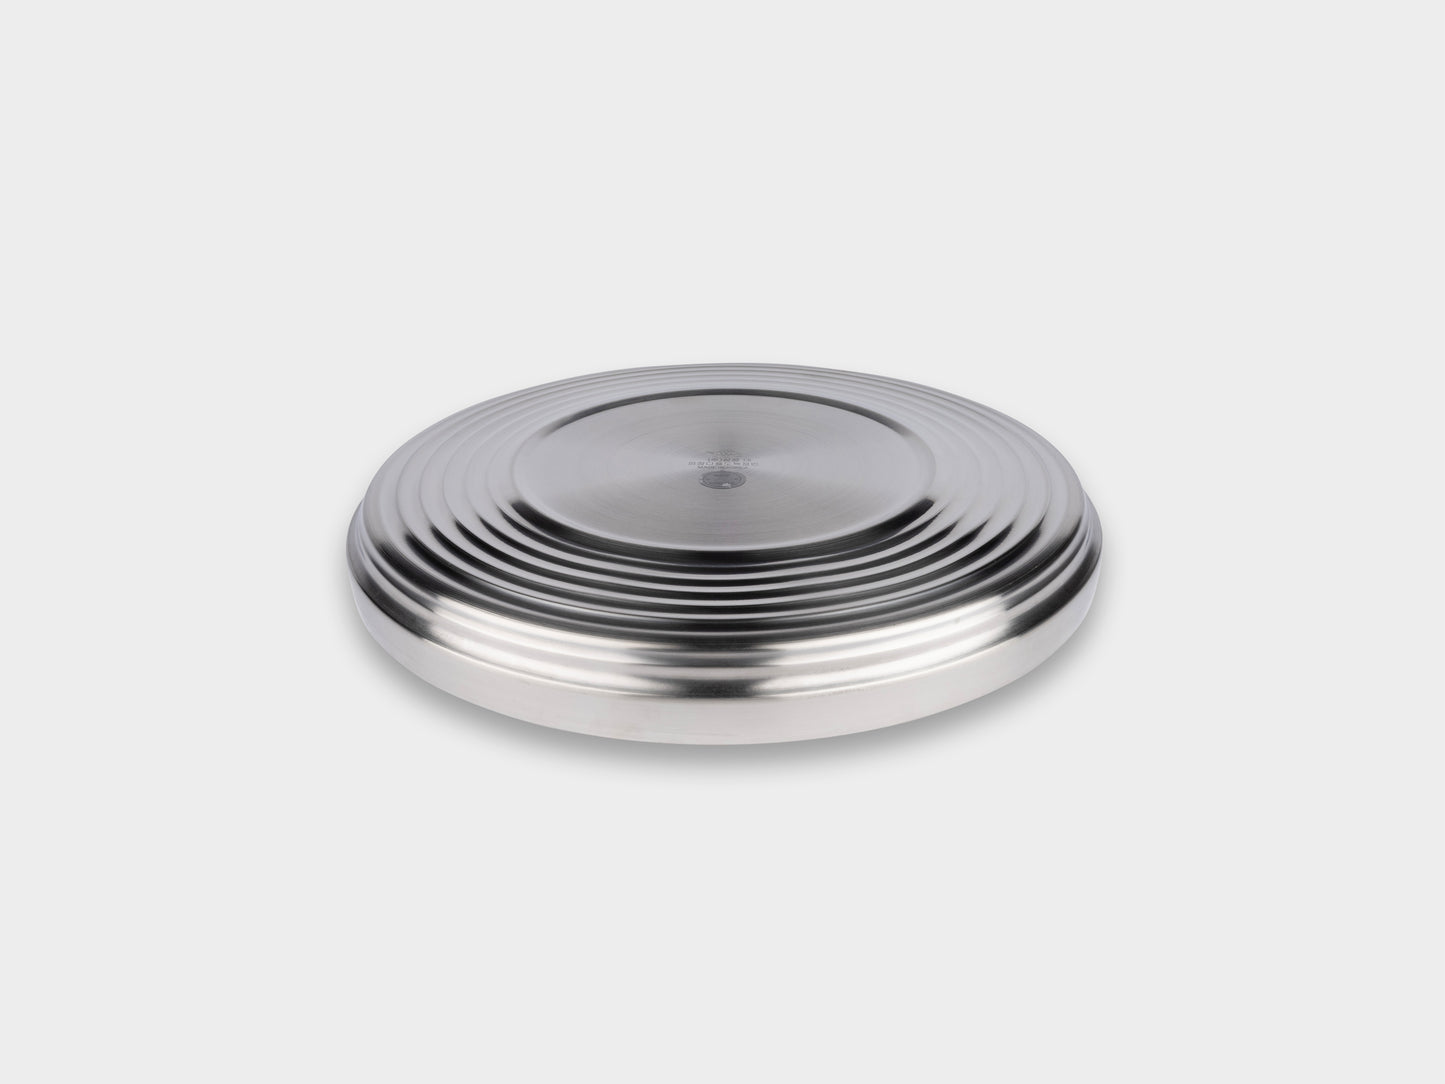 KM Stainless Double Wall Dish S